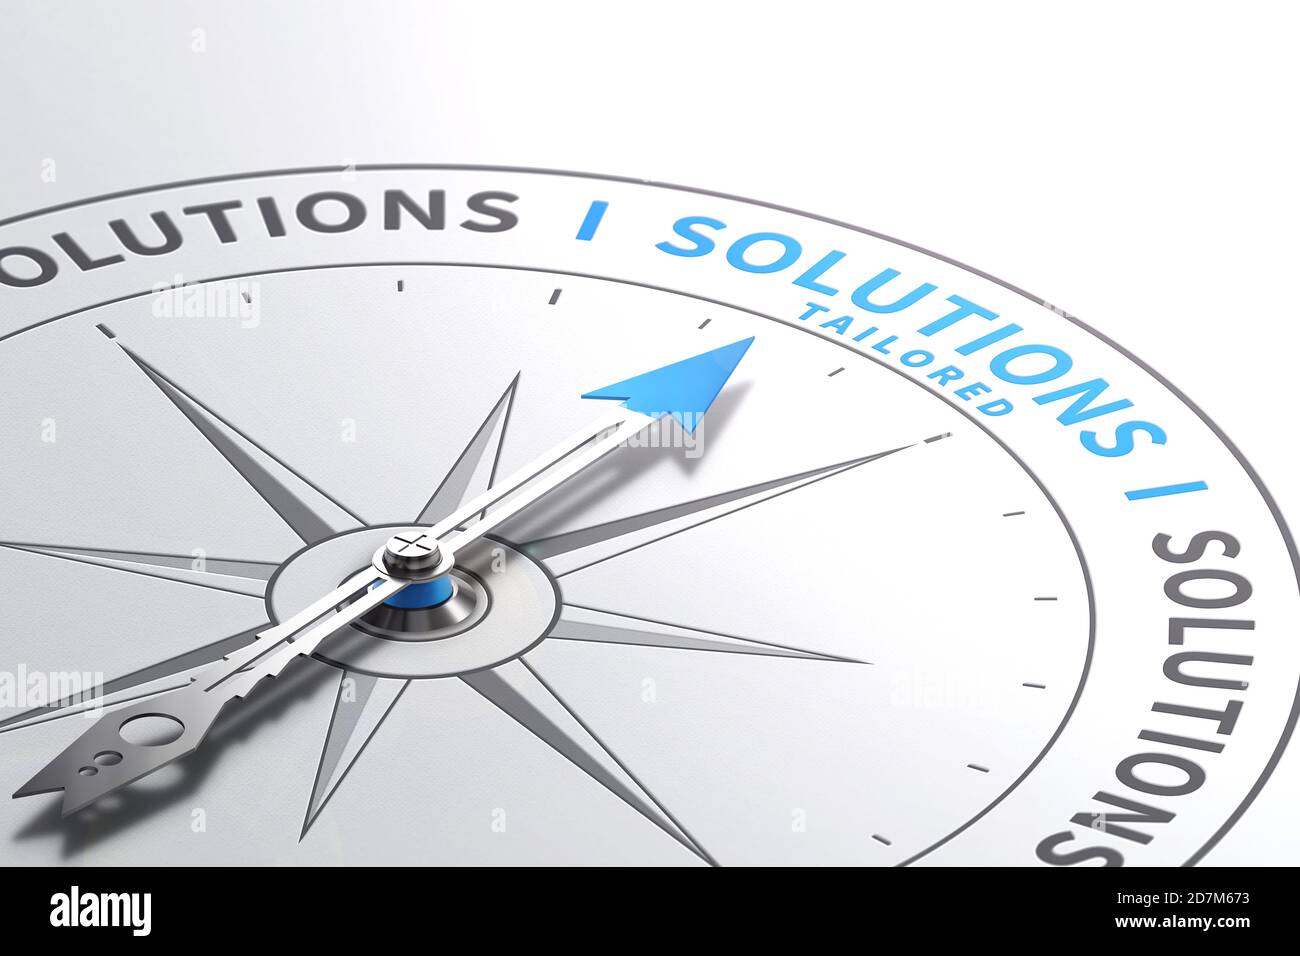 Solutions or Offers. Made-to measure Services. Stock Photo